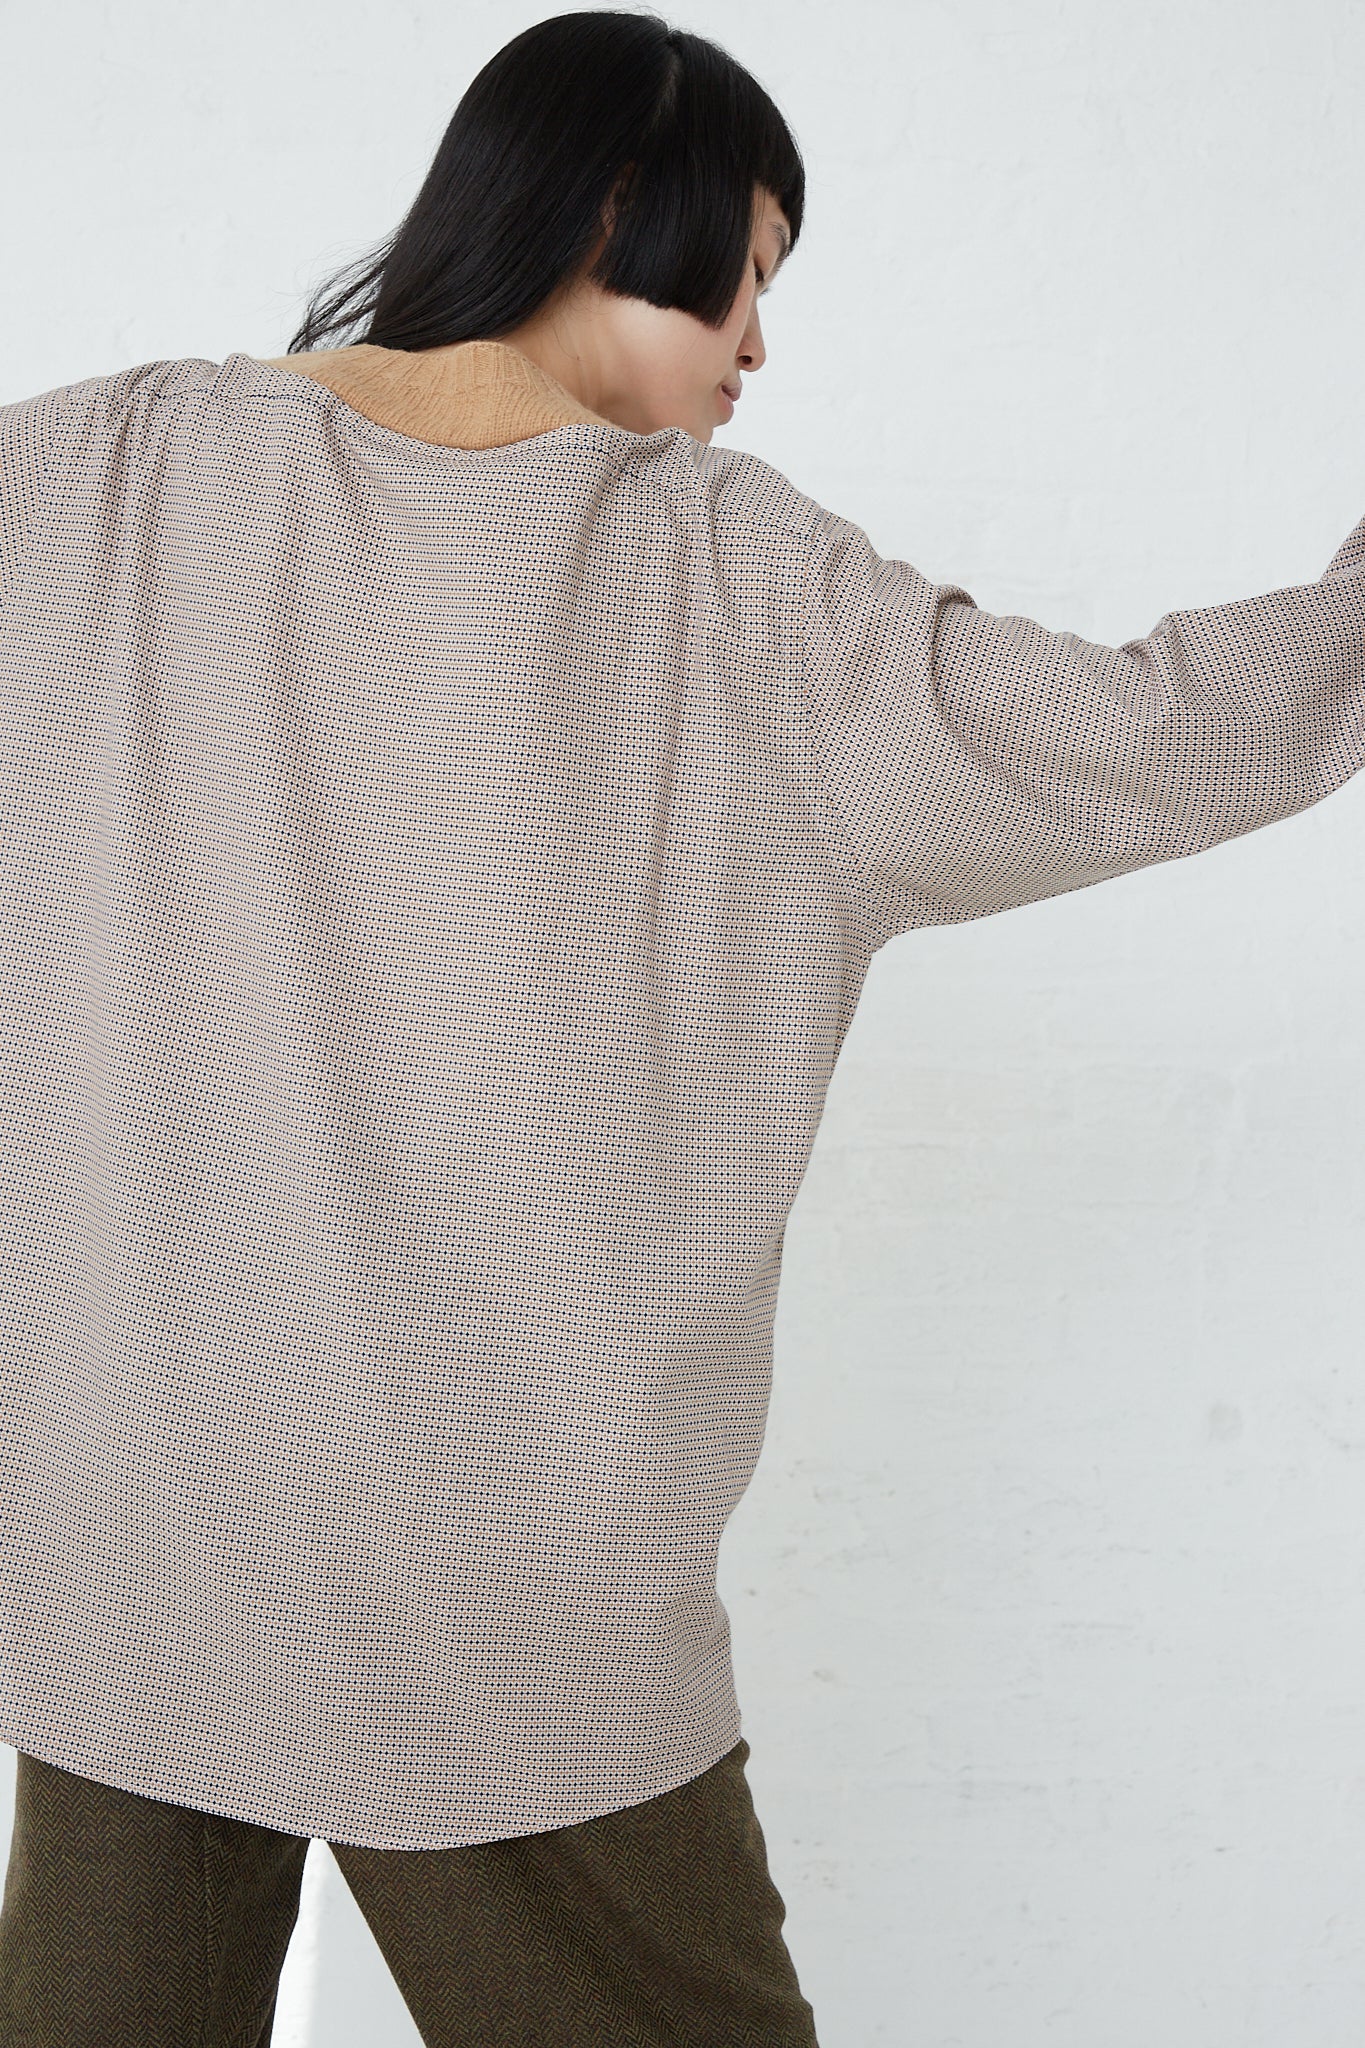 A woman wearing a long-sleeved Bless No. 68 Front Insert Pullover in Beige Pattern made of Shetland wool.